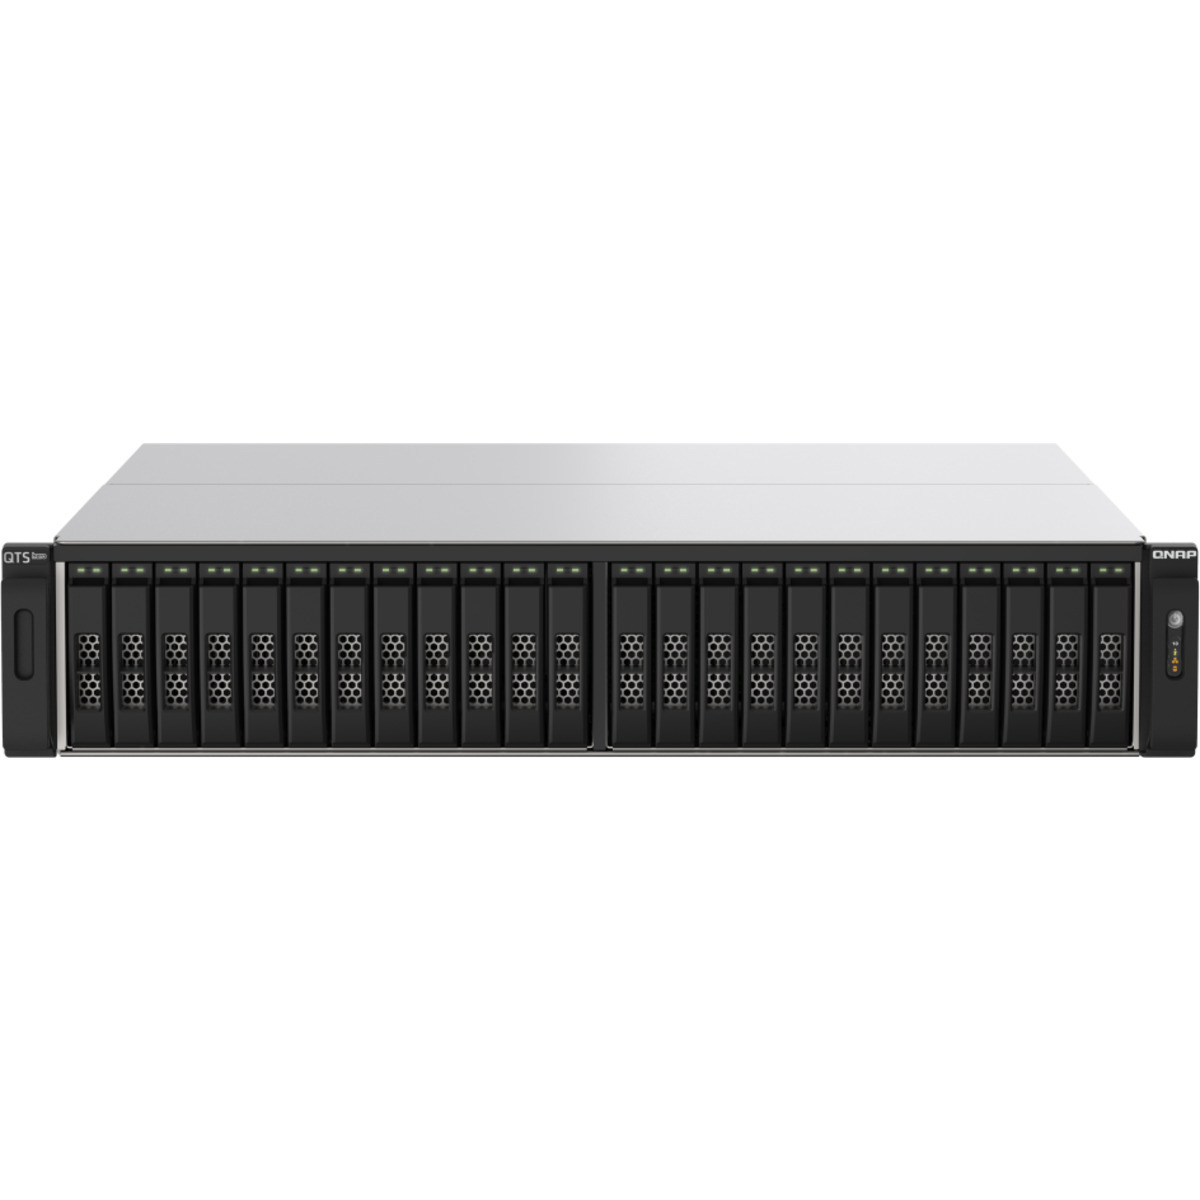 QNAP TS-h2490FU-7302P 176tb 24-Bay RackMount Large Business / Enterprise NAS - Network Attached Storage Device 22x8tb TeamGroup MP44 TM8FPW008T0C101  7200/6000MB/s M.2 2280 NVMe SSD CONSUMER Class Drives Installed - Burn-In Tested TS-h2490FU-7302P